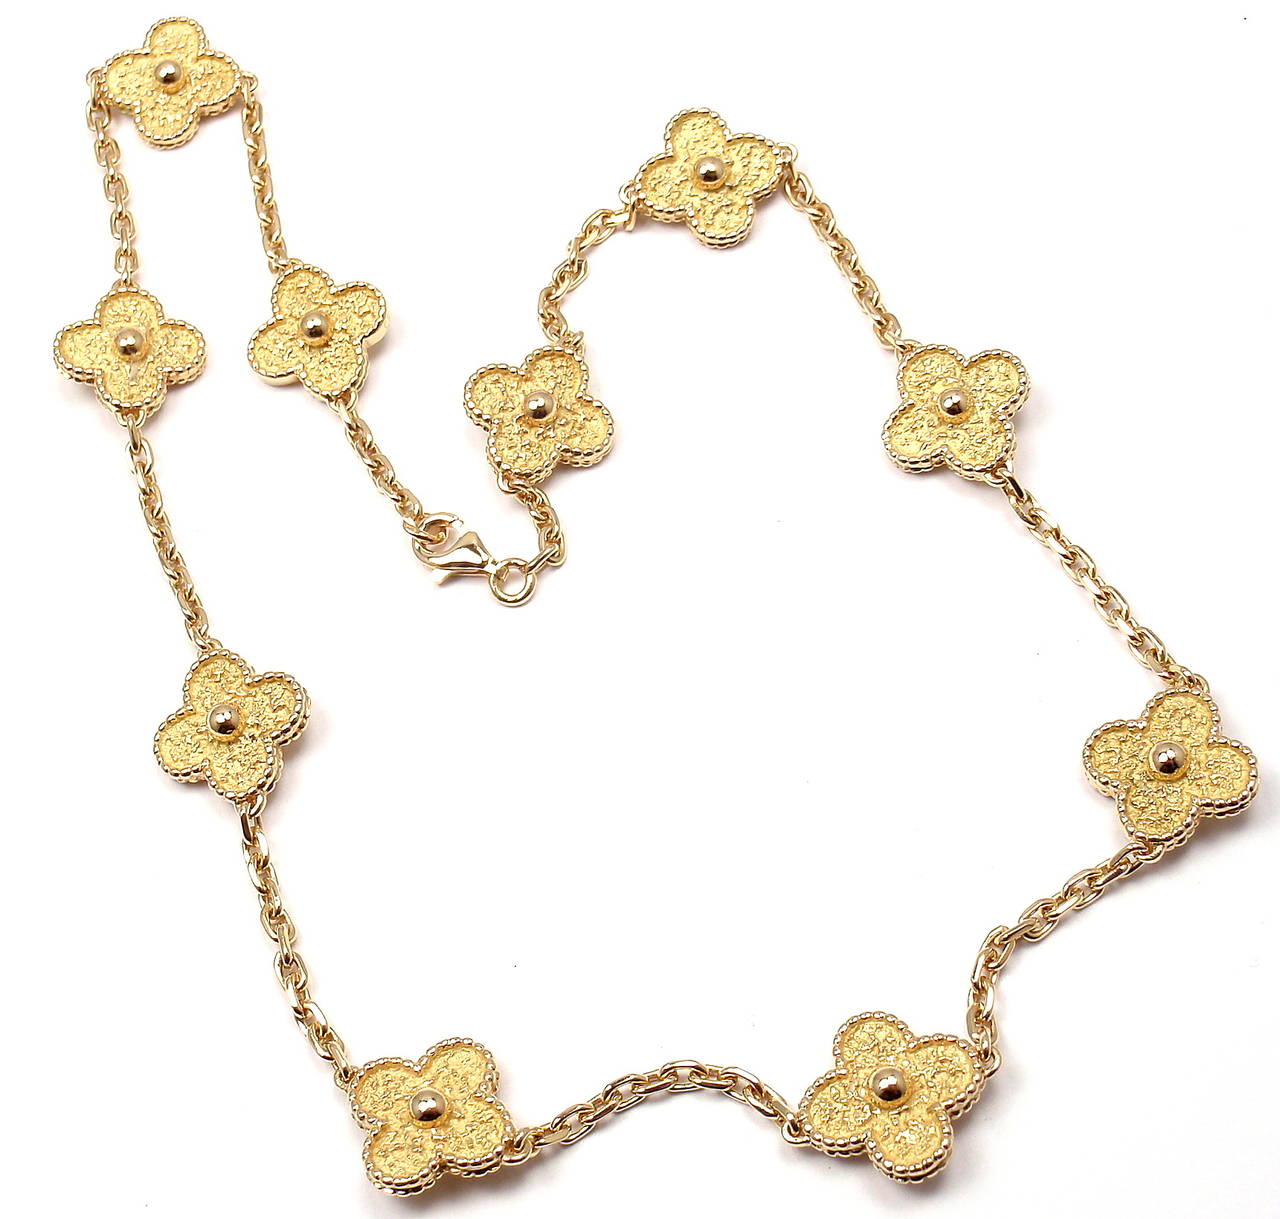 18k Yellow Gold Vintage Alhambra 10 Motif Necklace by Van Cleef & Arpels. 
This necklace comes with VCA service certificate from Van Cleef & Arpels store.

Details: 
Length: 16.5